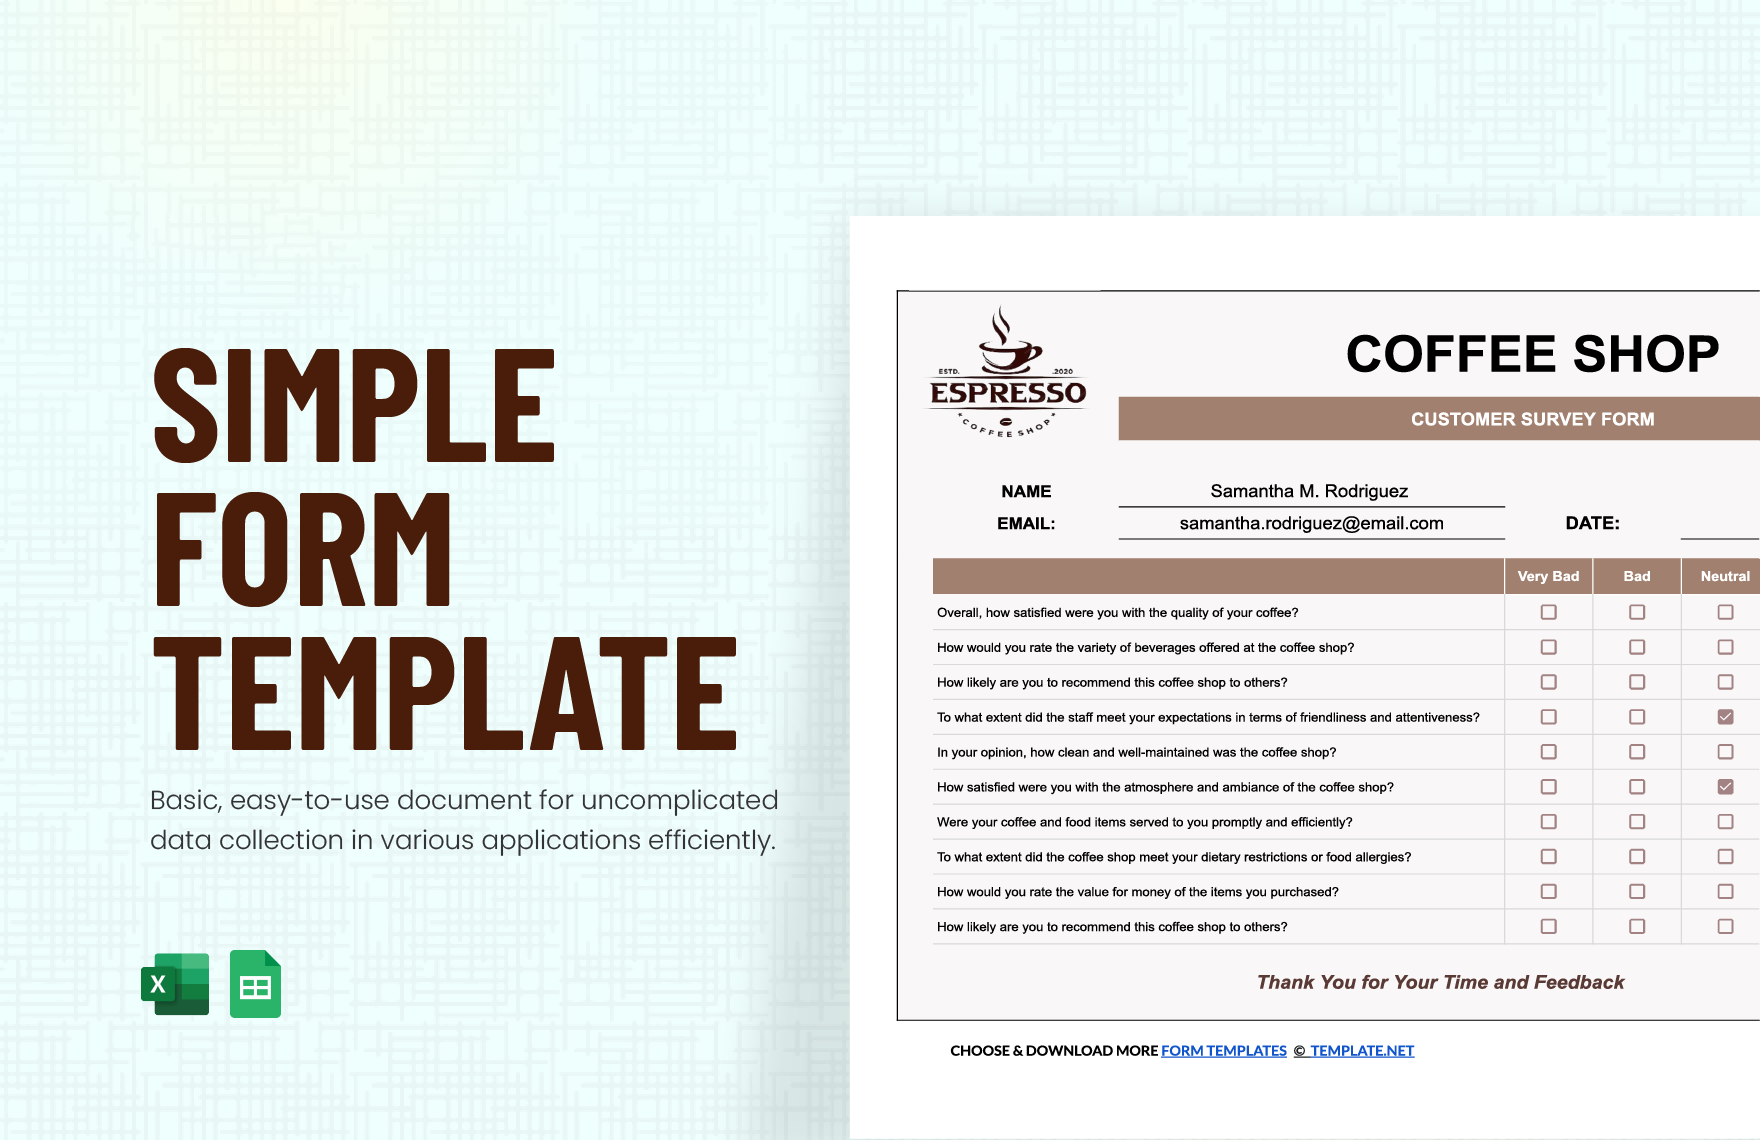 Simple Form Template